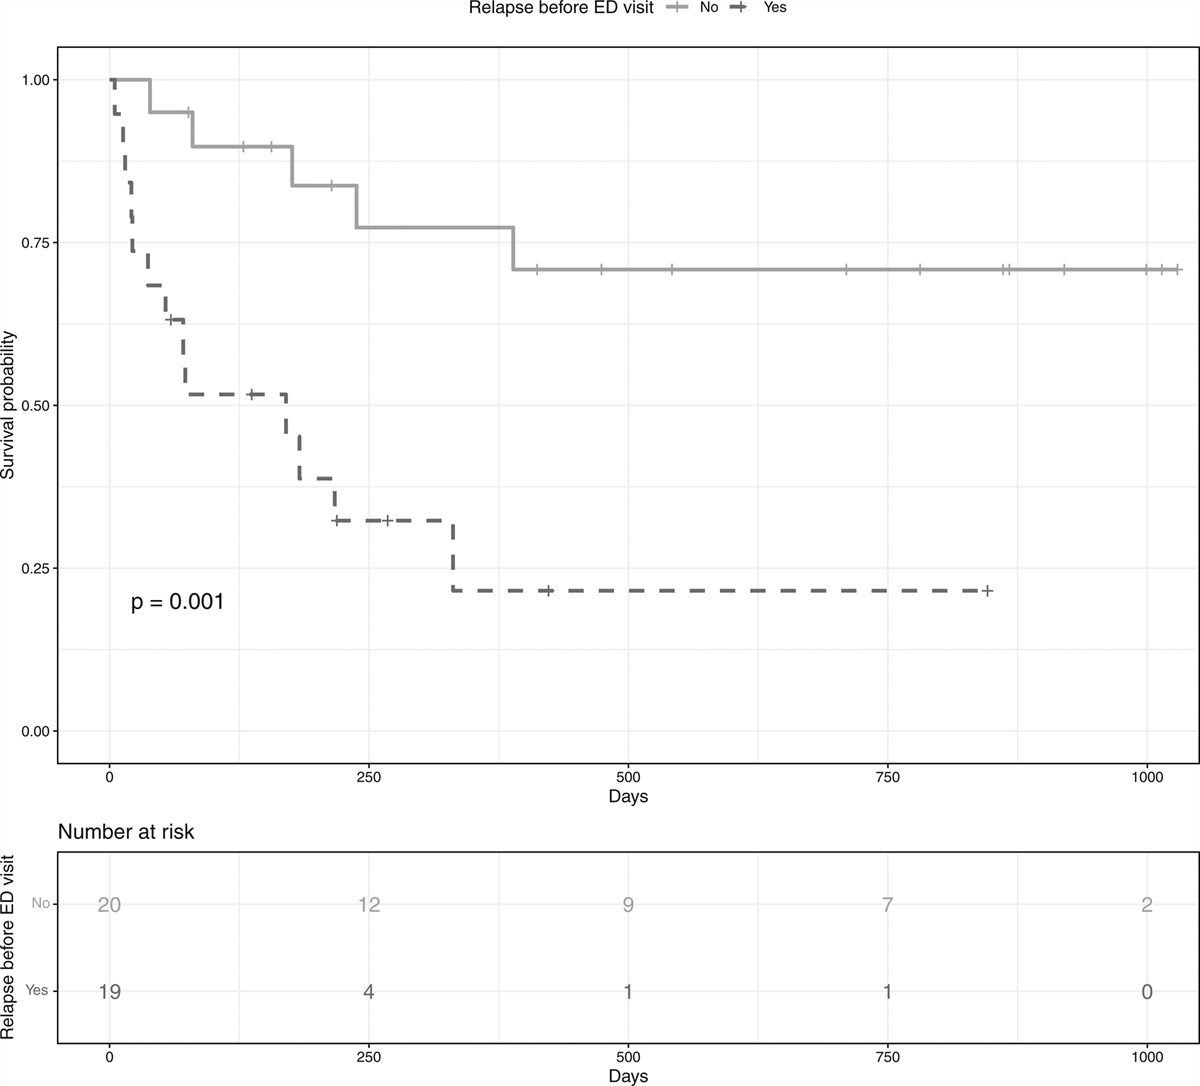 Emergency department visits after chimeric antigen receptor T cell therapy: a retrospective observational study